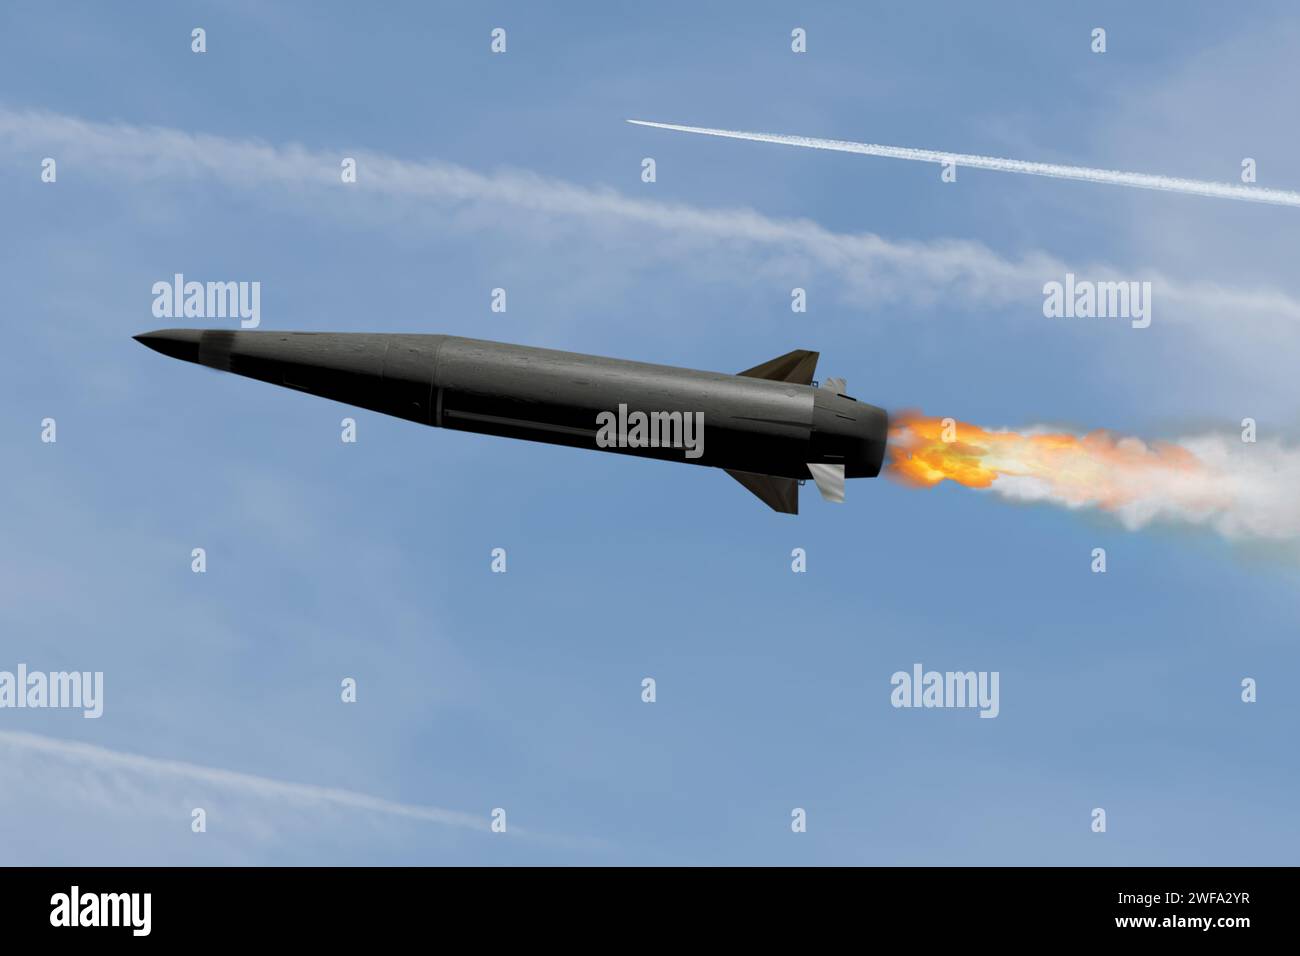 A supersonic Russian Dagger missile in flight against a blue sky. Concept: missile attack. Stock Photo